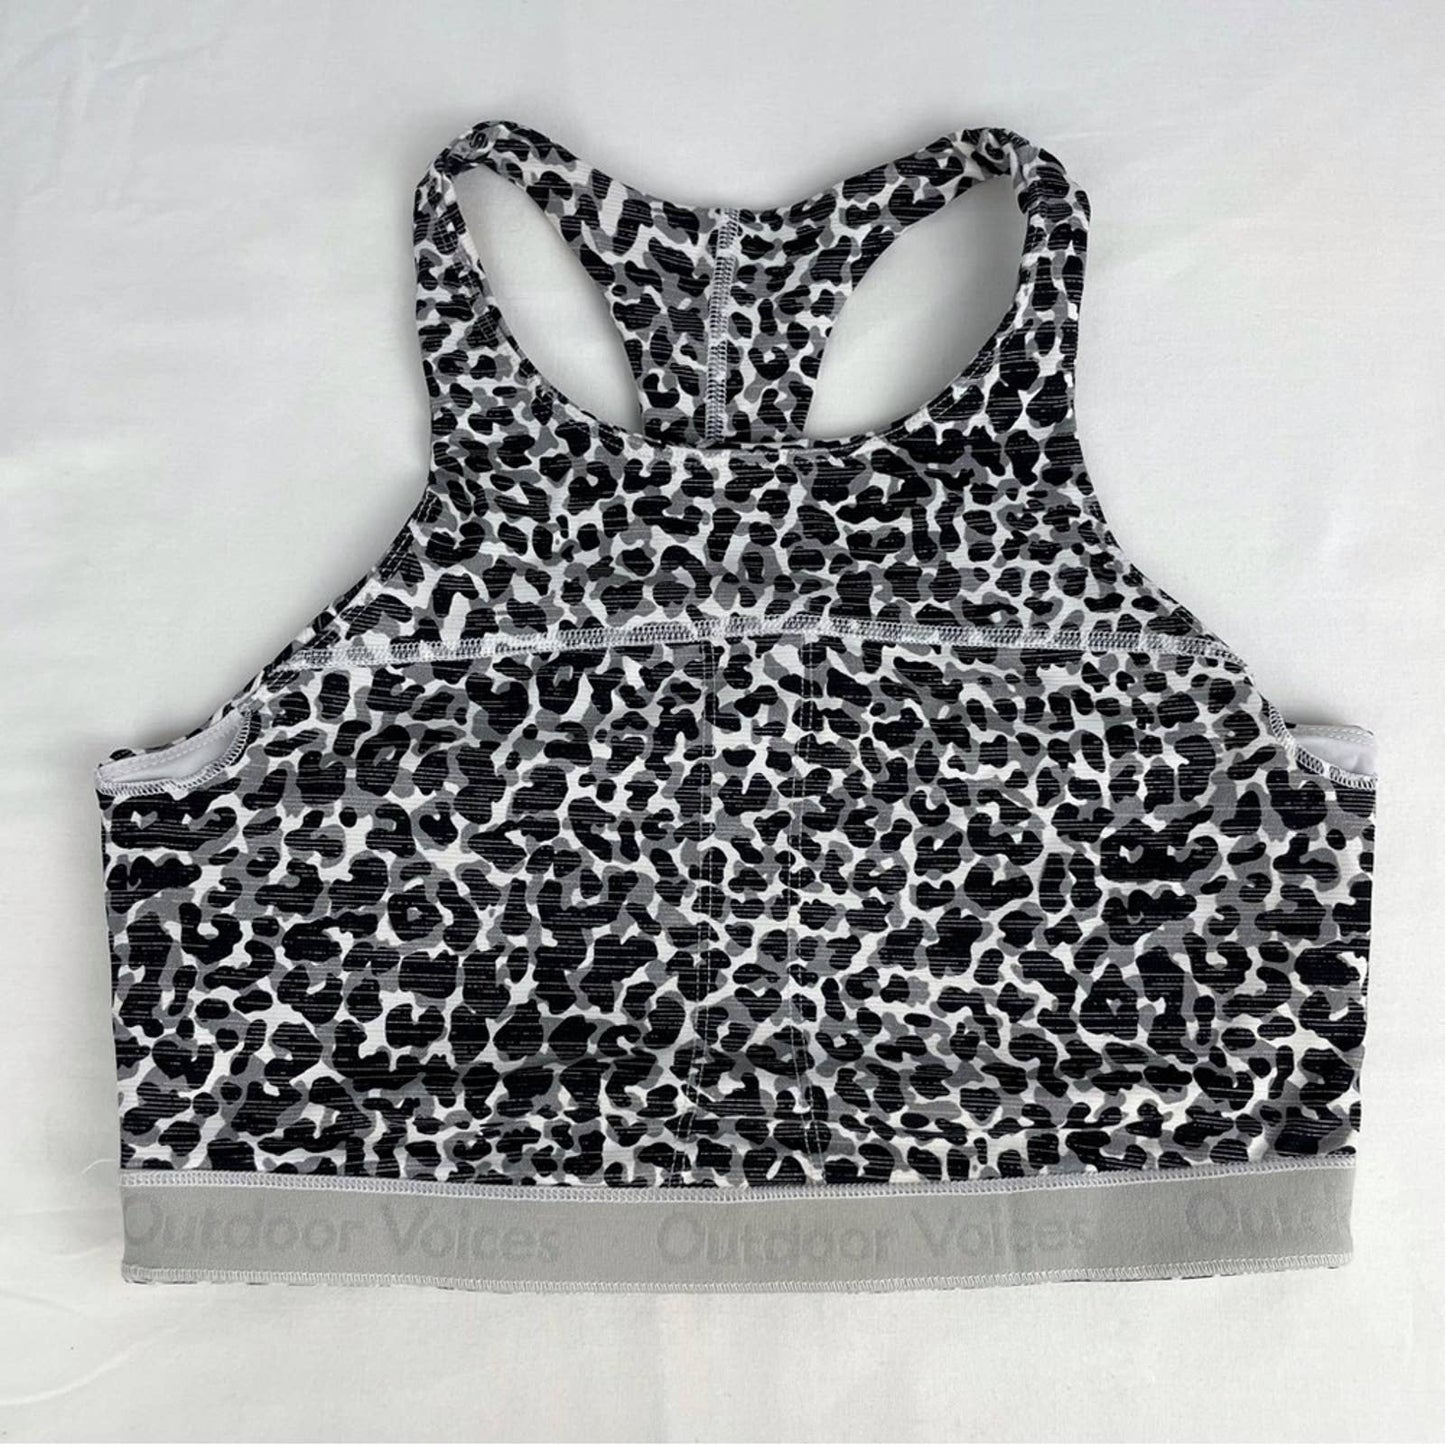 Outdoor Voices Move Free Crop Top Snow Leopard Animal Print Sports Bra Tank Top Size M